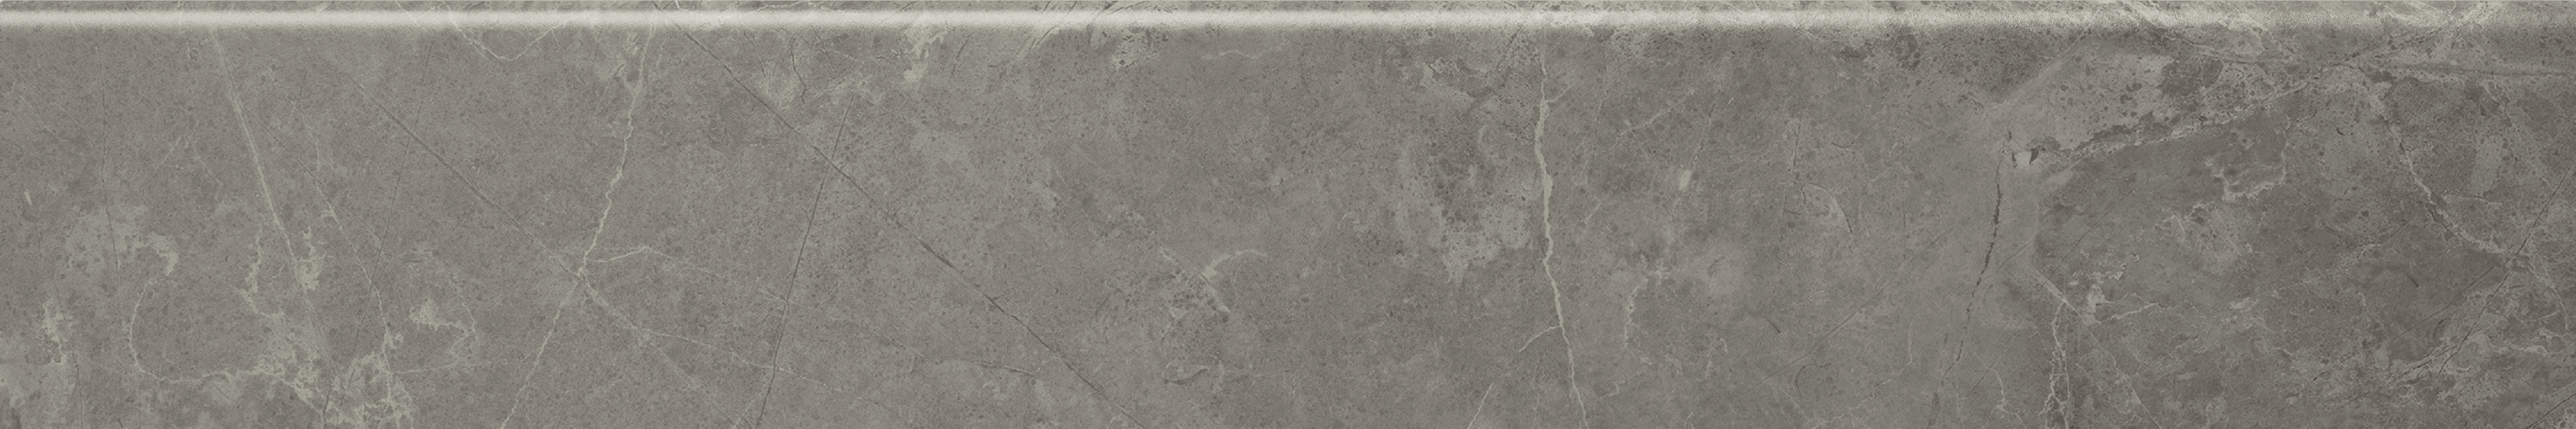 Panaria Trilogy Sandy Grey Antibacterial - Soft Skirting board PGRTY30 10x60cm rectified 9,5mm